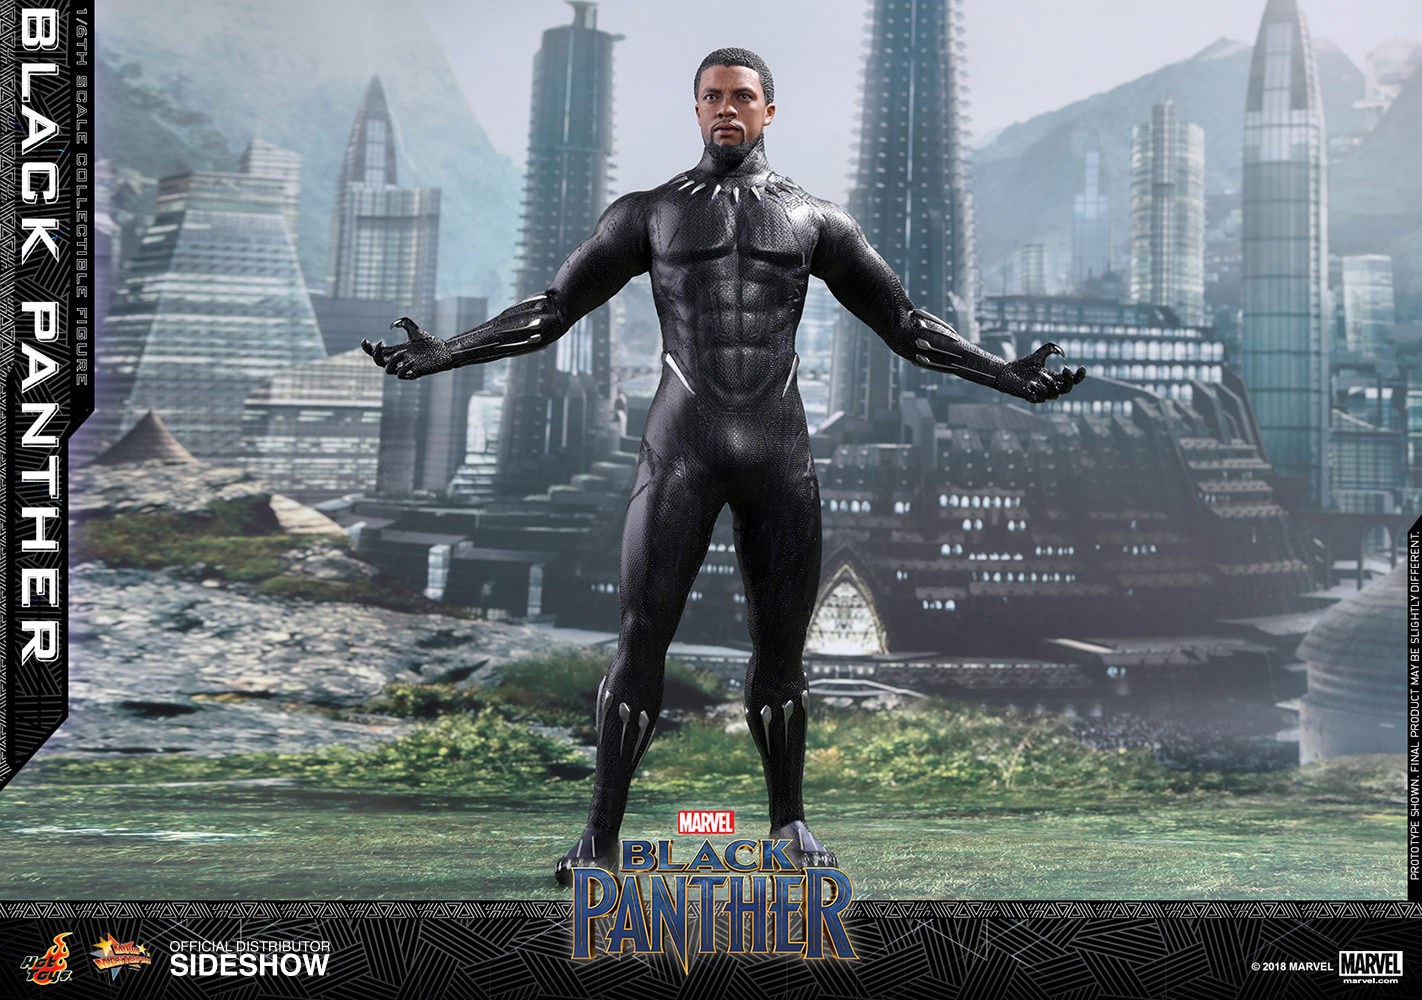 Look At This $260 Black Panther Action Figure